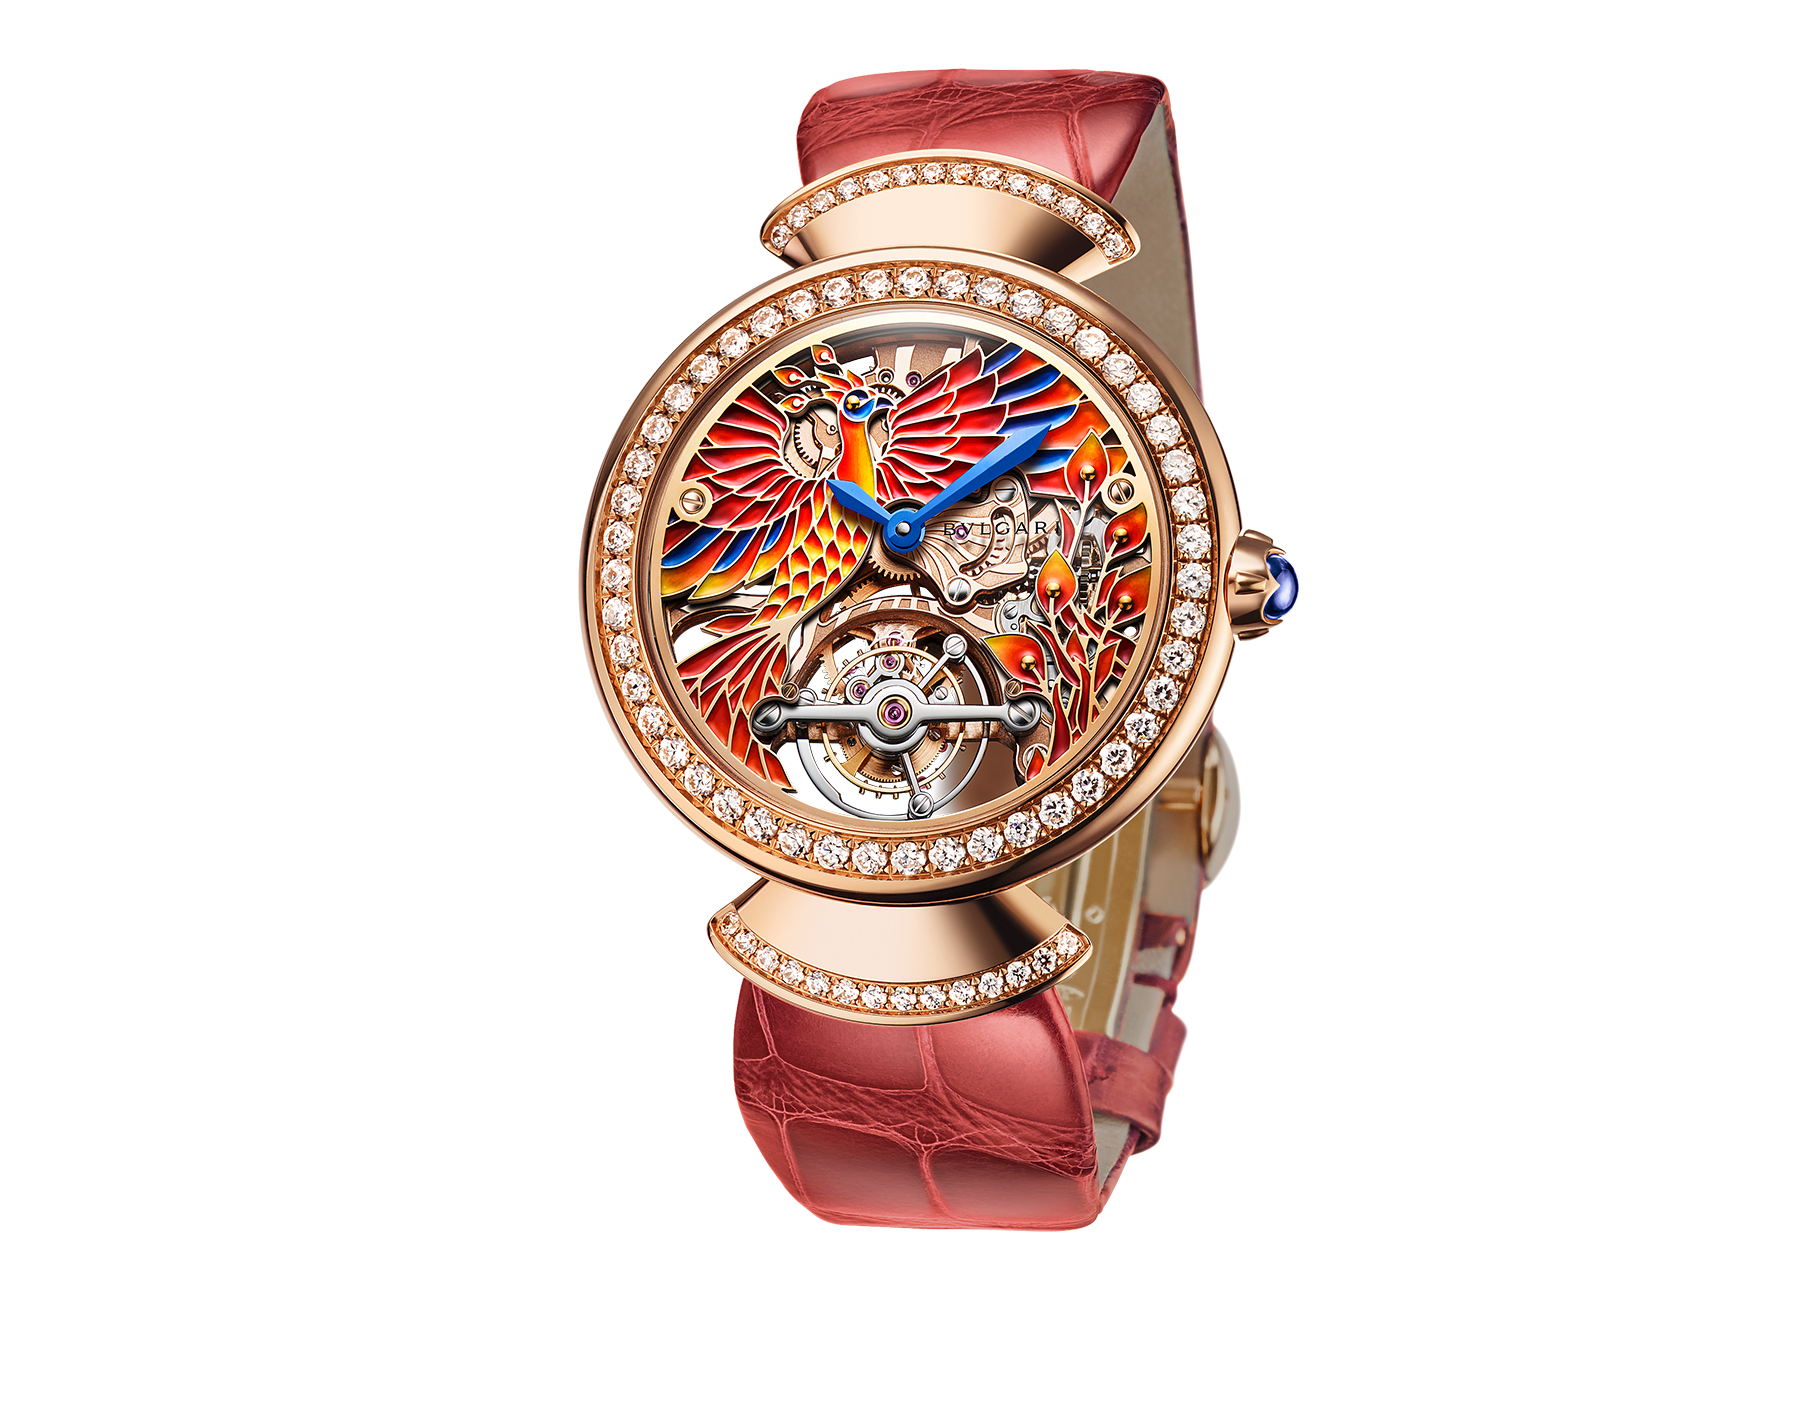 DIVAS' DREAM Tourbillon Phoenix Limited Edition watch with mechanical manufacture movement, manual winding, see-through tourbillon, 18 kt rose gold case set with brilliant-cut diamonds, skeletonized dial decorated with hand painted miniature motifs of a phoenix and flames, and red alligator bracelet 102947 image 1